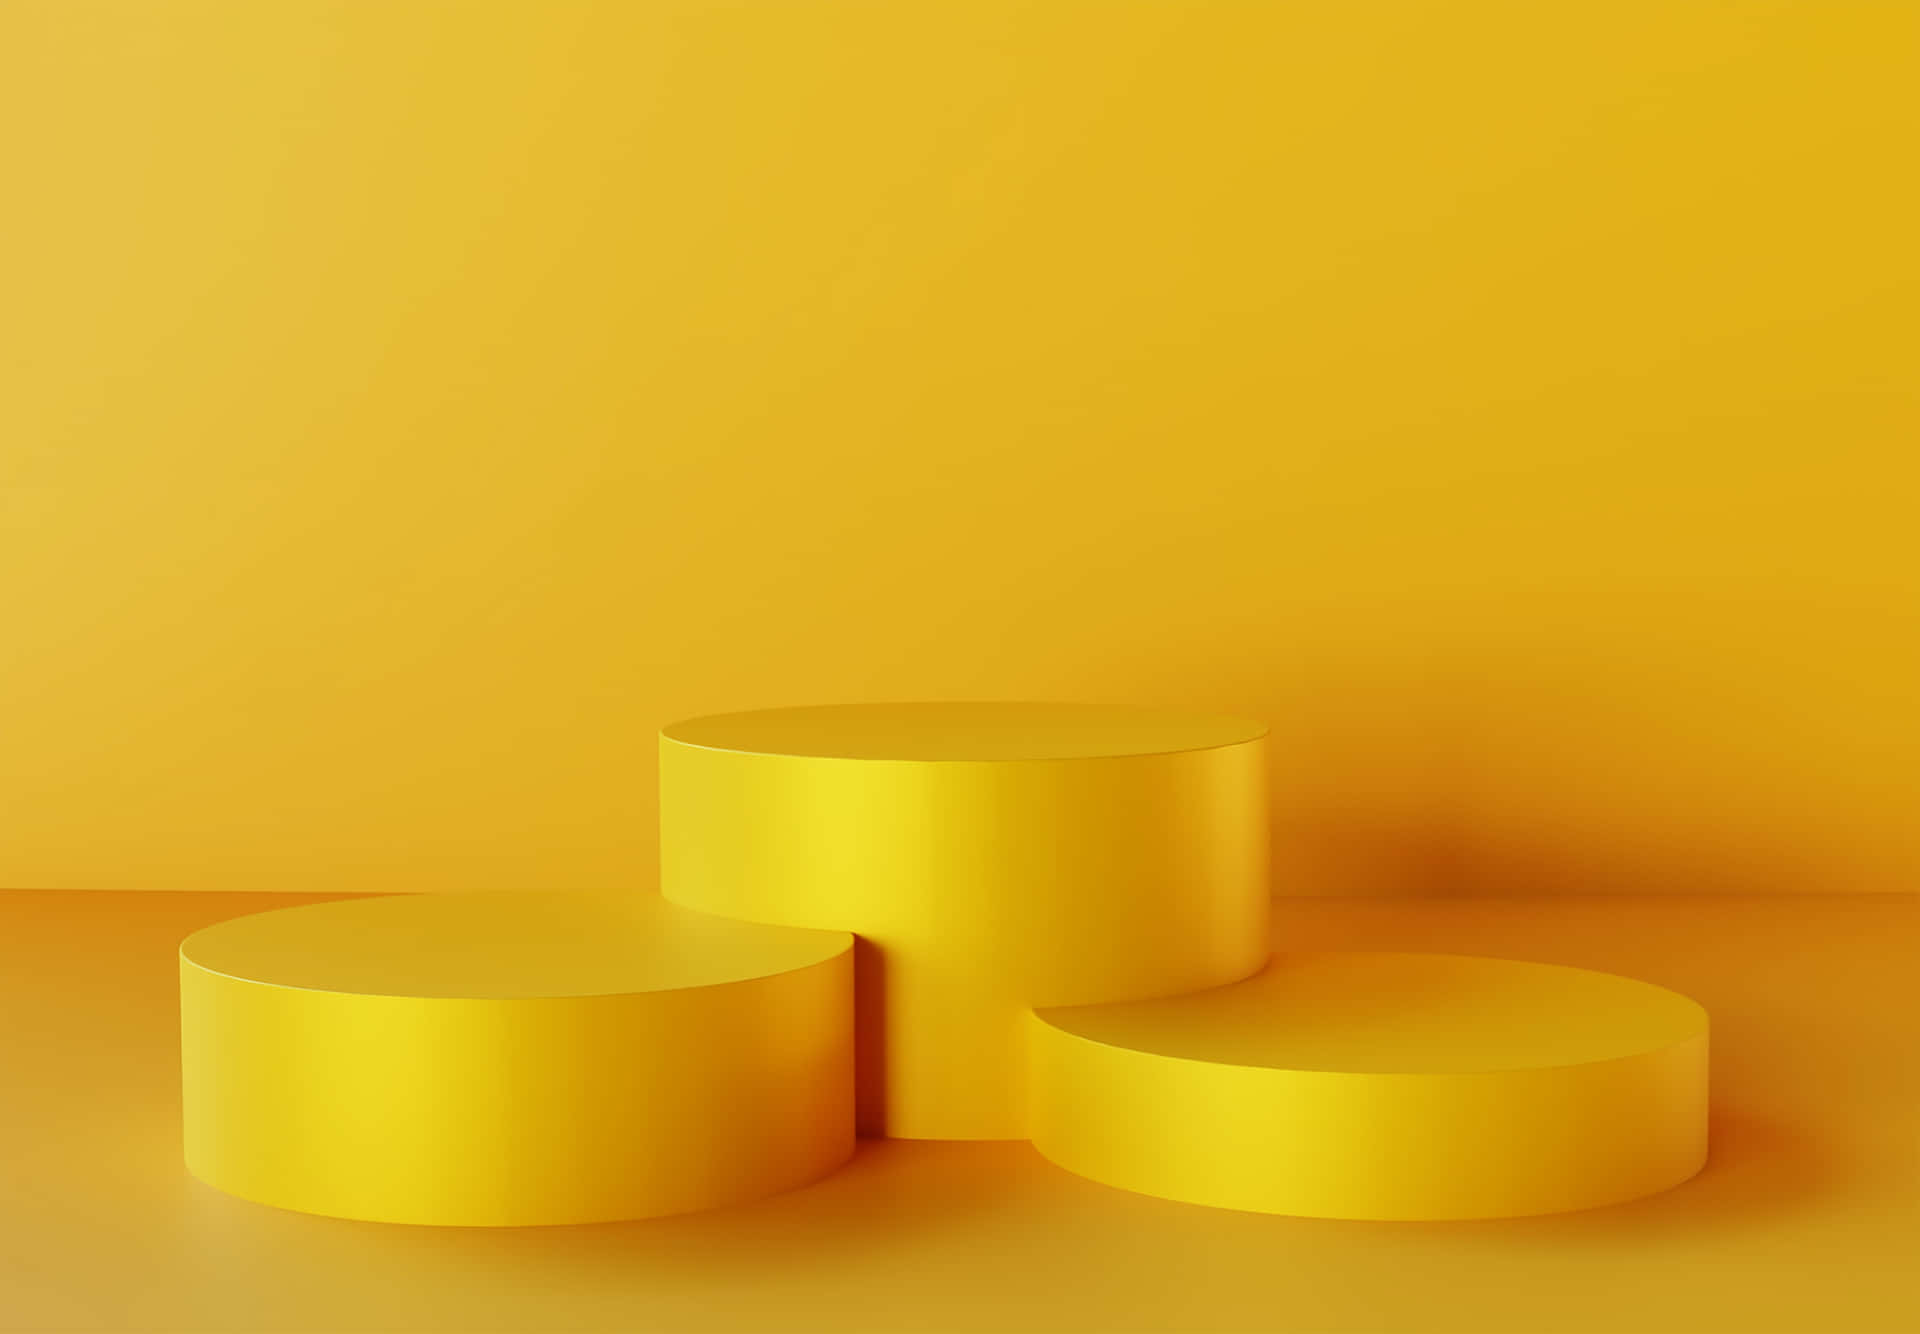 Three Yellow Circular Pedestals On A Yellow Background